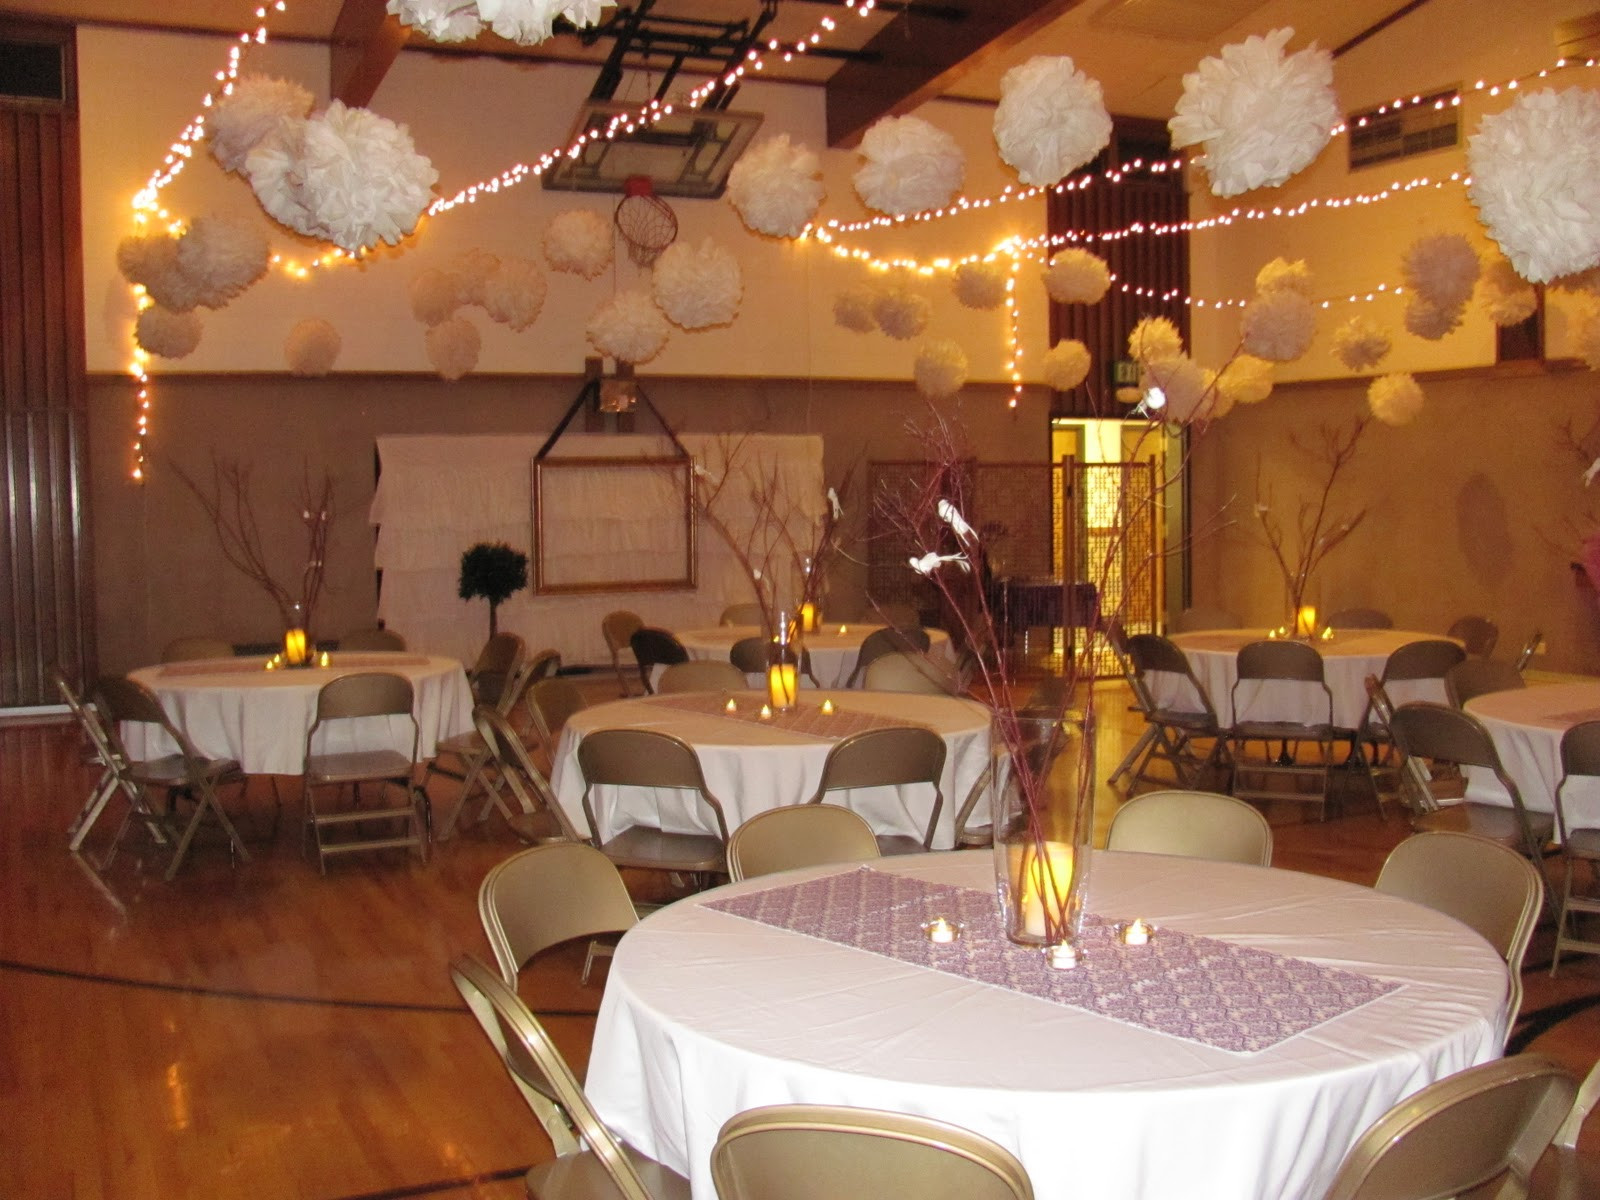 How To Decorate Wedding Reception
 Header Wedding Open House Decorating